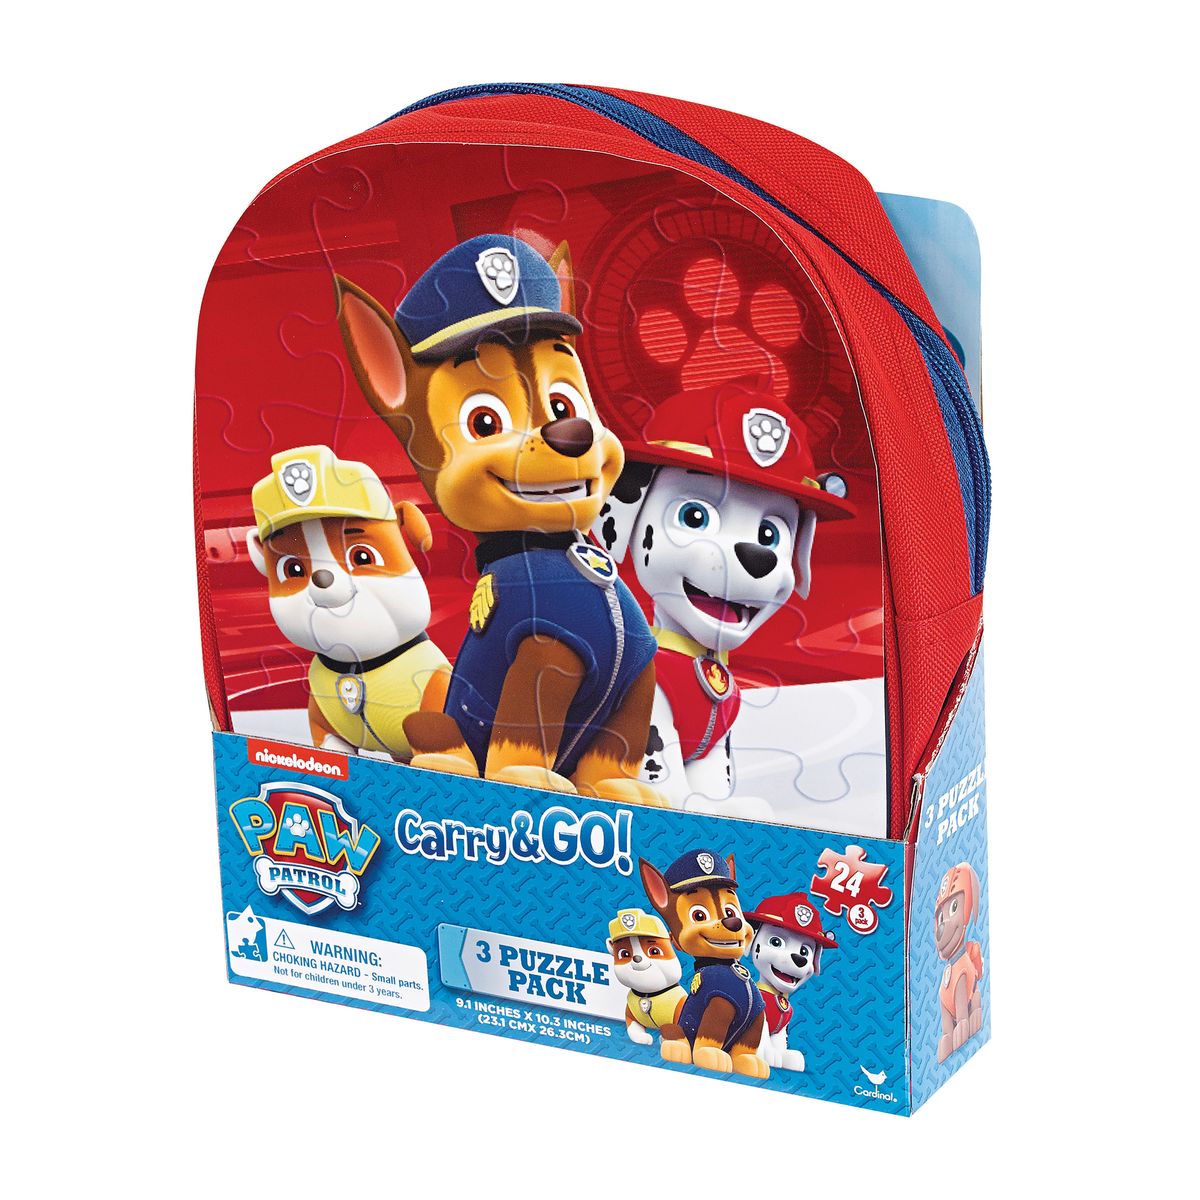 Paw Patrol 3 Puzzle In Backpack | Buy Online in South Africa | takealot.com